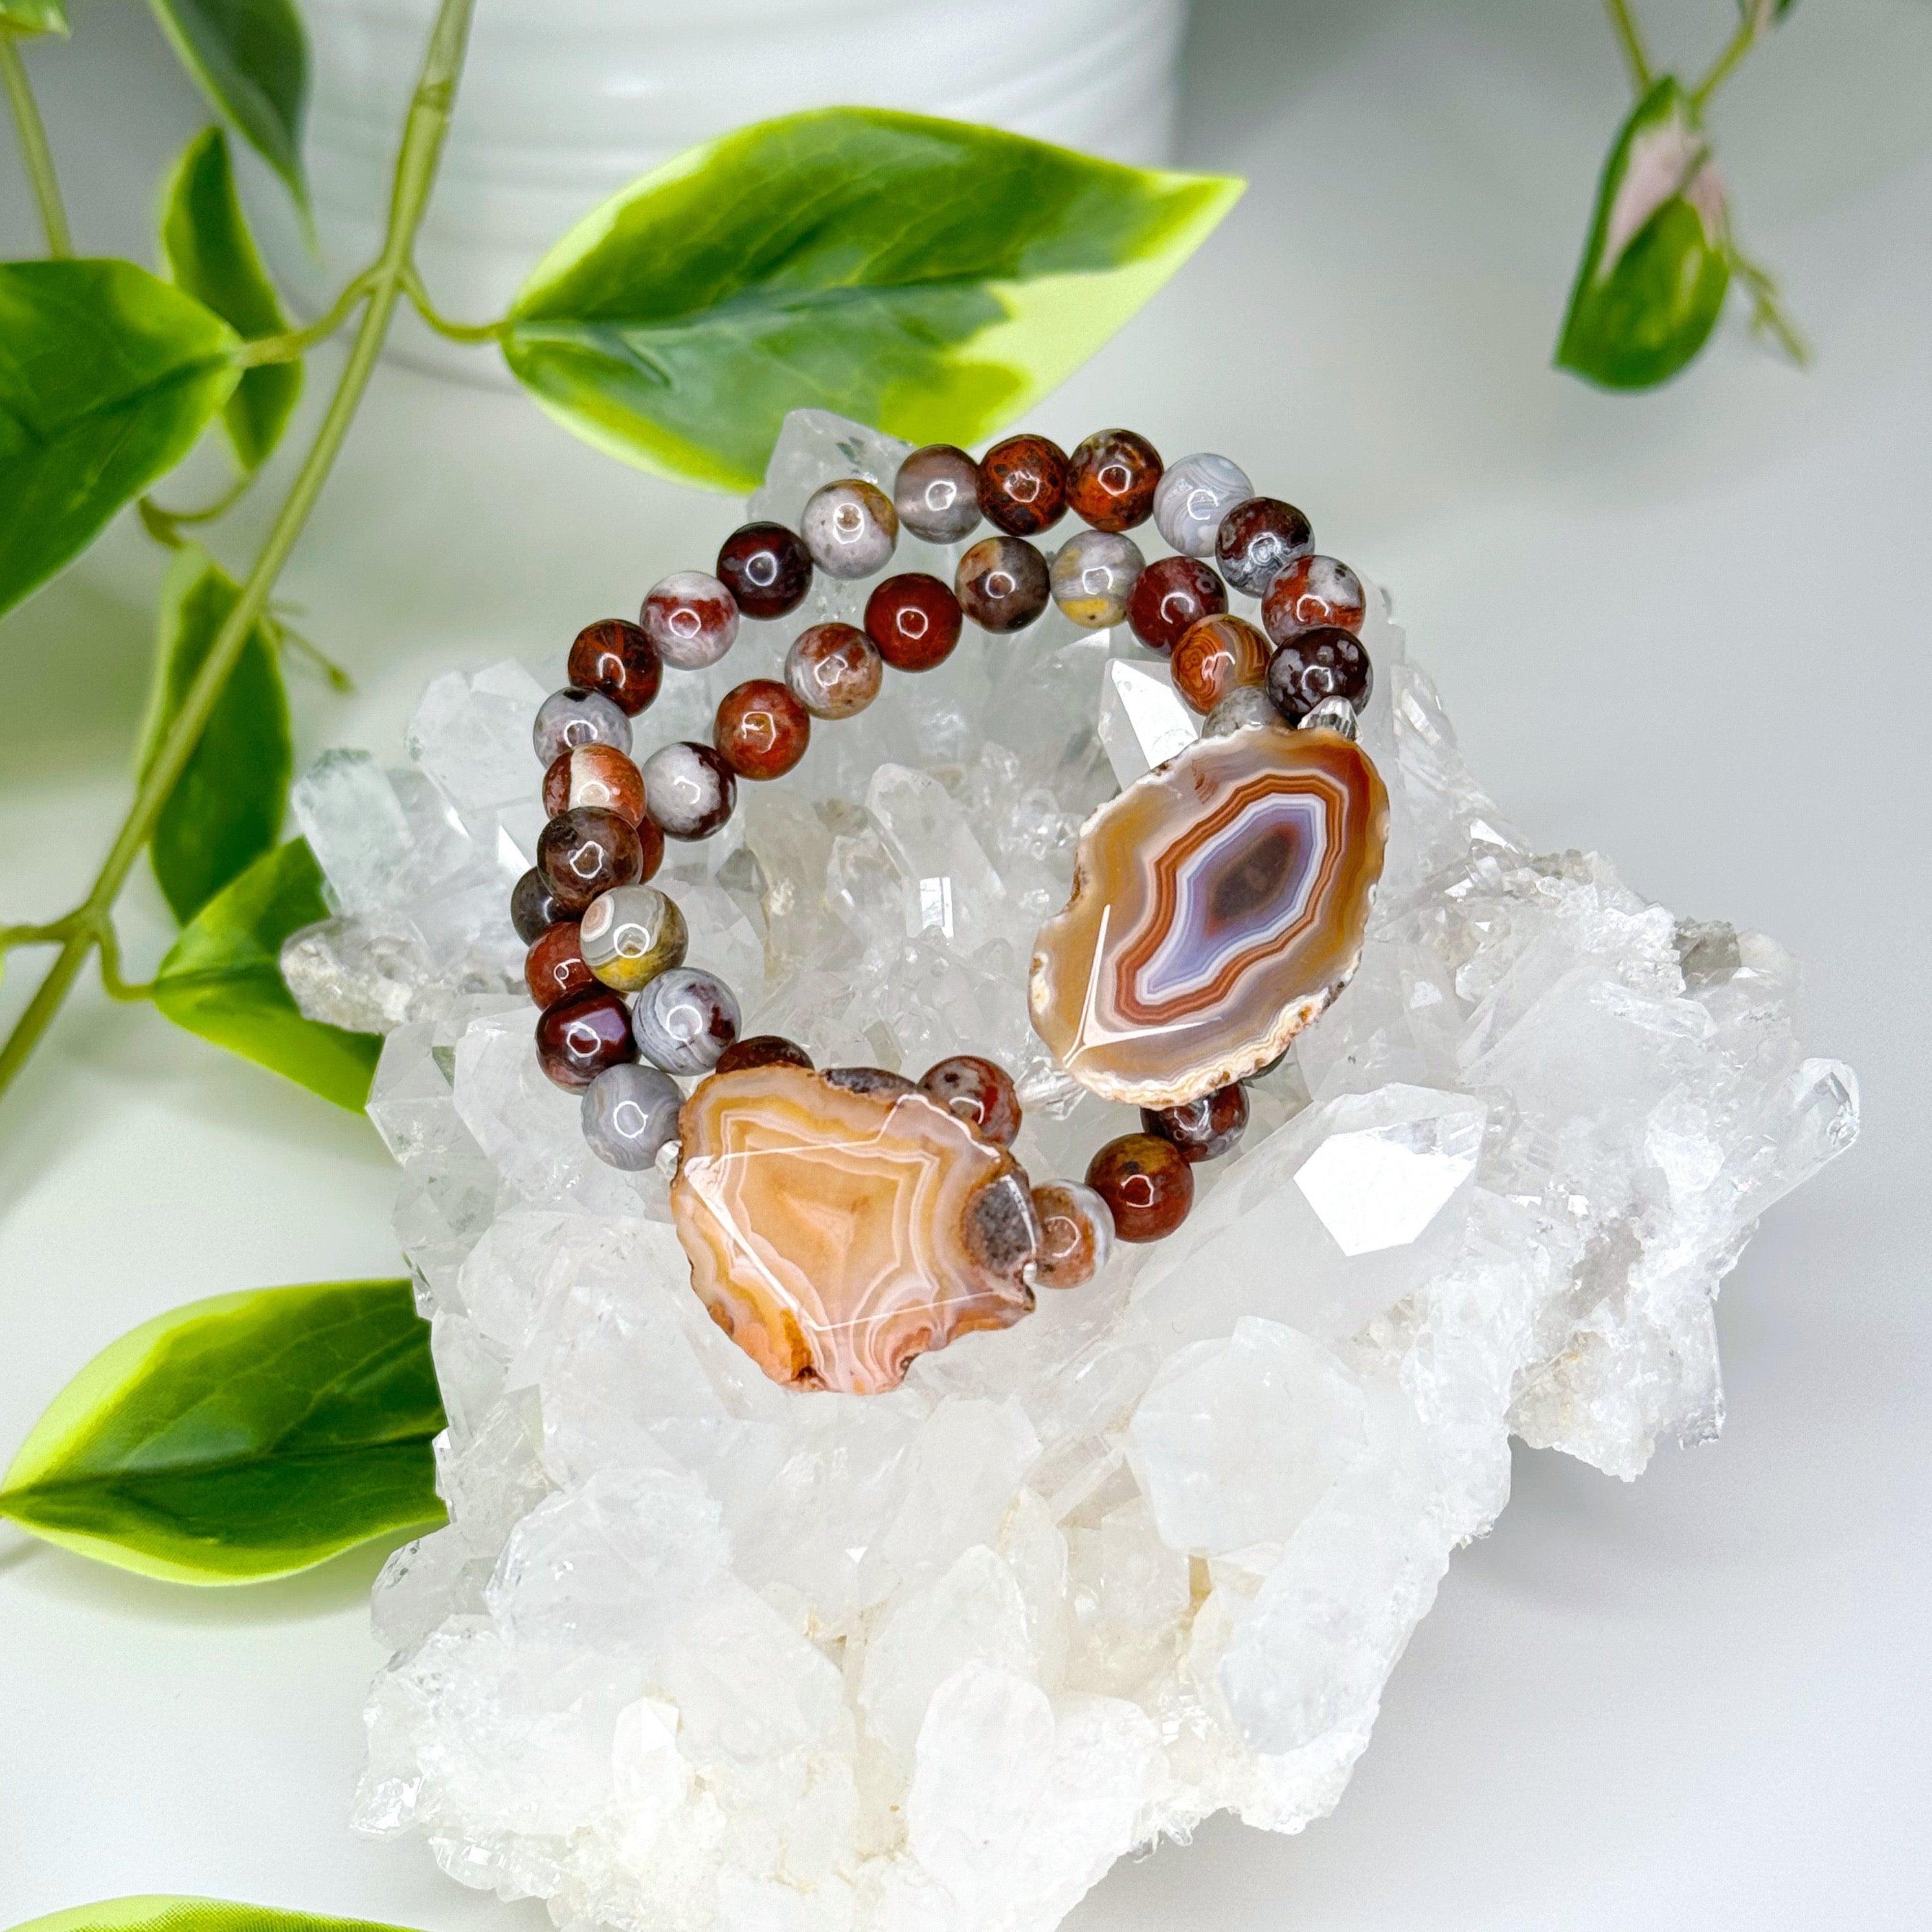 LAGUNA AGATE + CONDOR AGATE SLICE 8mm - HANDMADE CRYSTAL BRACELET - 6mm, agate, bracelet, brown, condor agate, crystal bracelet, fire, gemini, gemini stack, grey, handmade bracelet, jewelry, laguna agate, market bracelet, mixed colors, recently added, spring collection, Wearable - The Mineral Maven